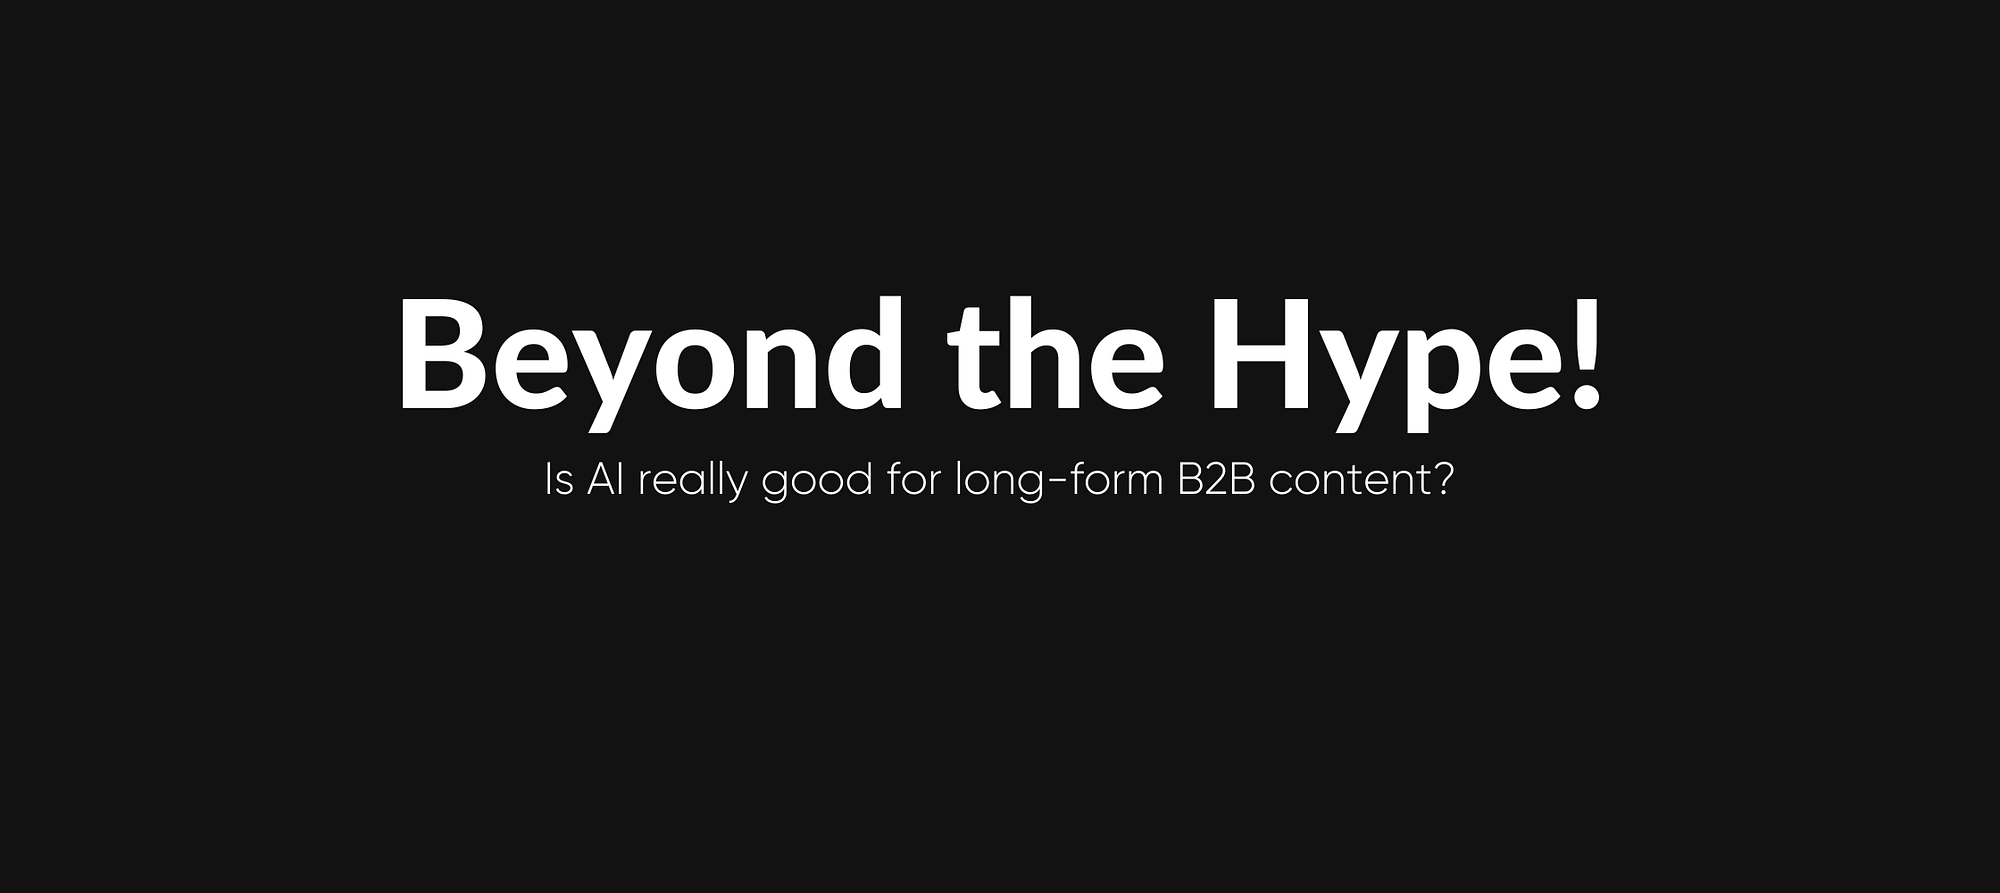 Beyond the Hype: 4 Areas Where AI Writers Fall Short for B2B Tech Content Writing